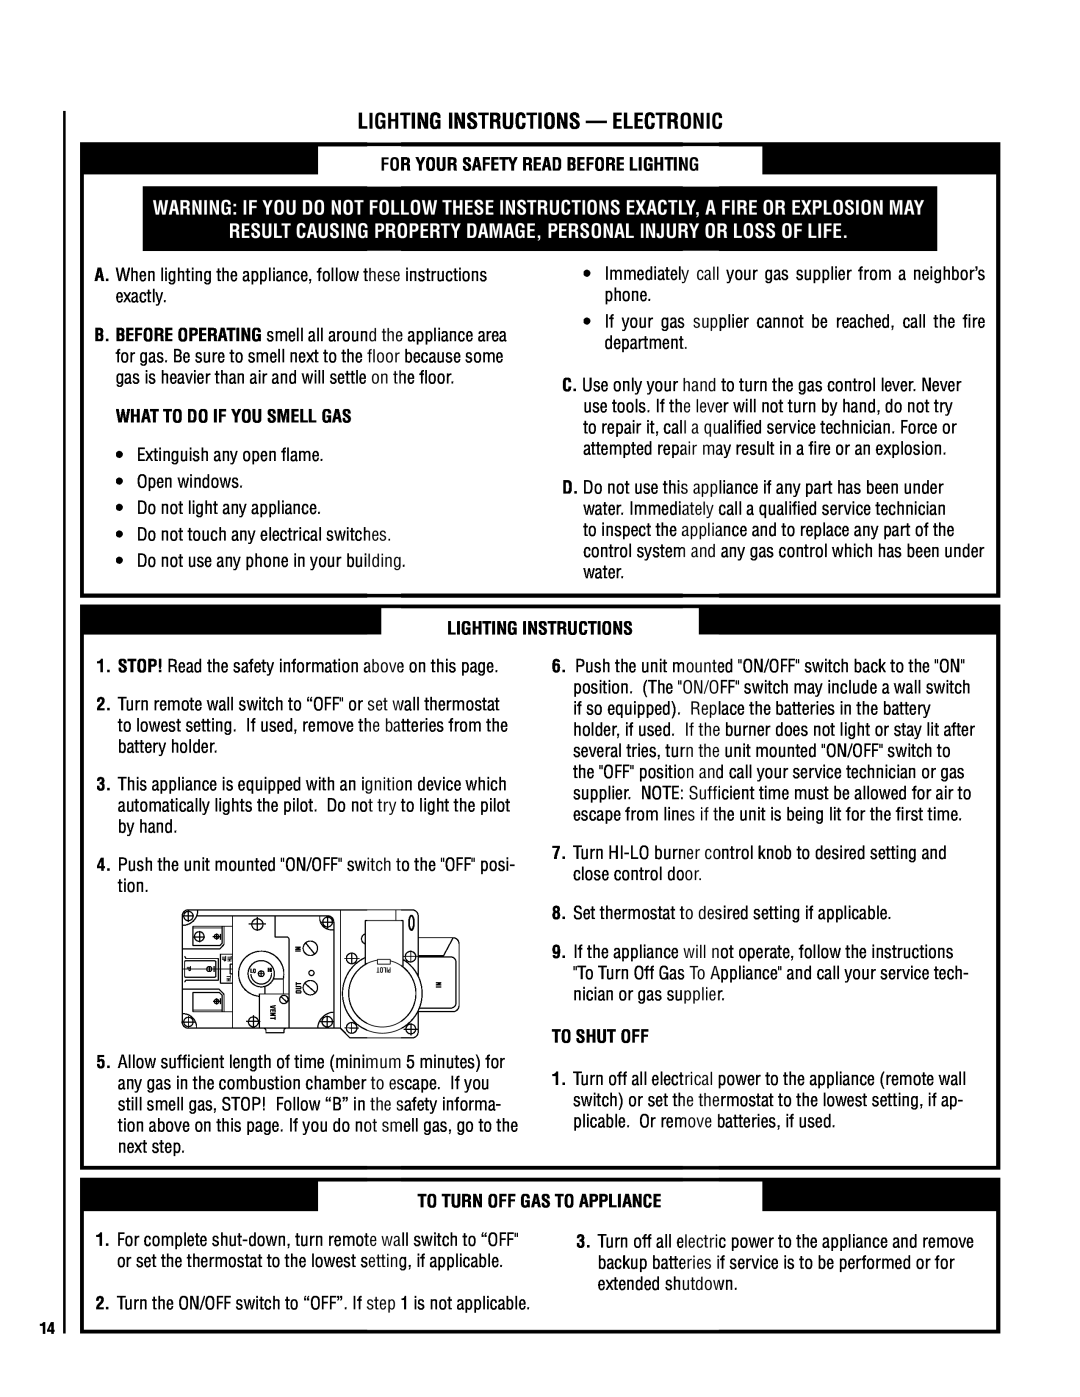 Lennox Hearth MP04-VDLE manual For Your Safety Read Before Lighting, What To Do If You Smell Gas, Lighting Instructions 